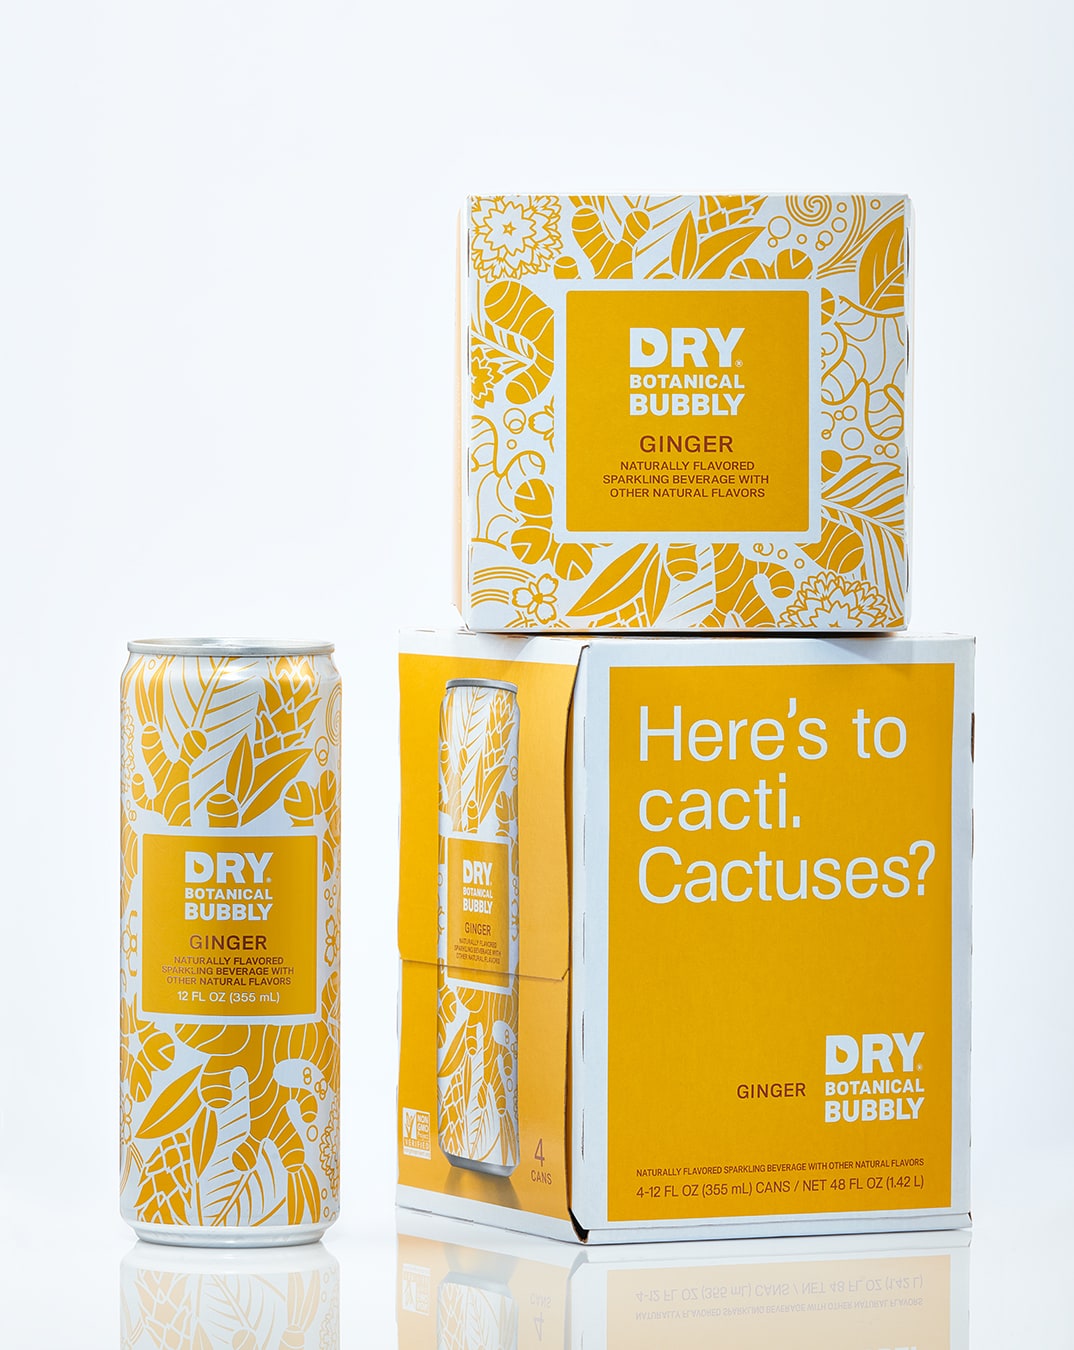 Dry Botanical Bubbly can and packaging design ginger flavor